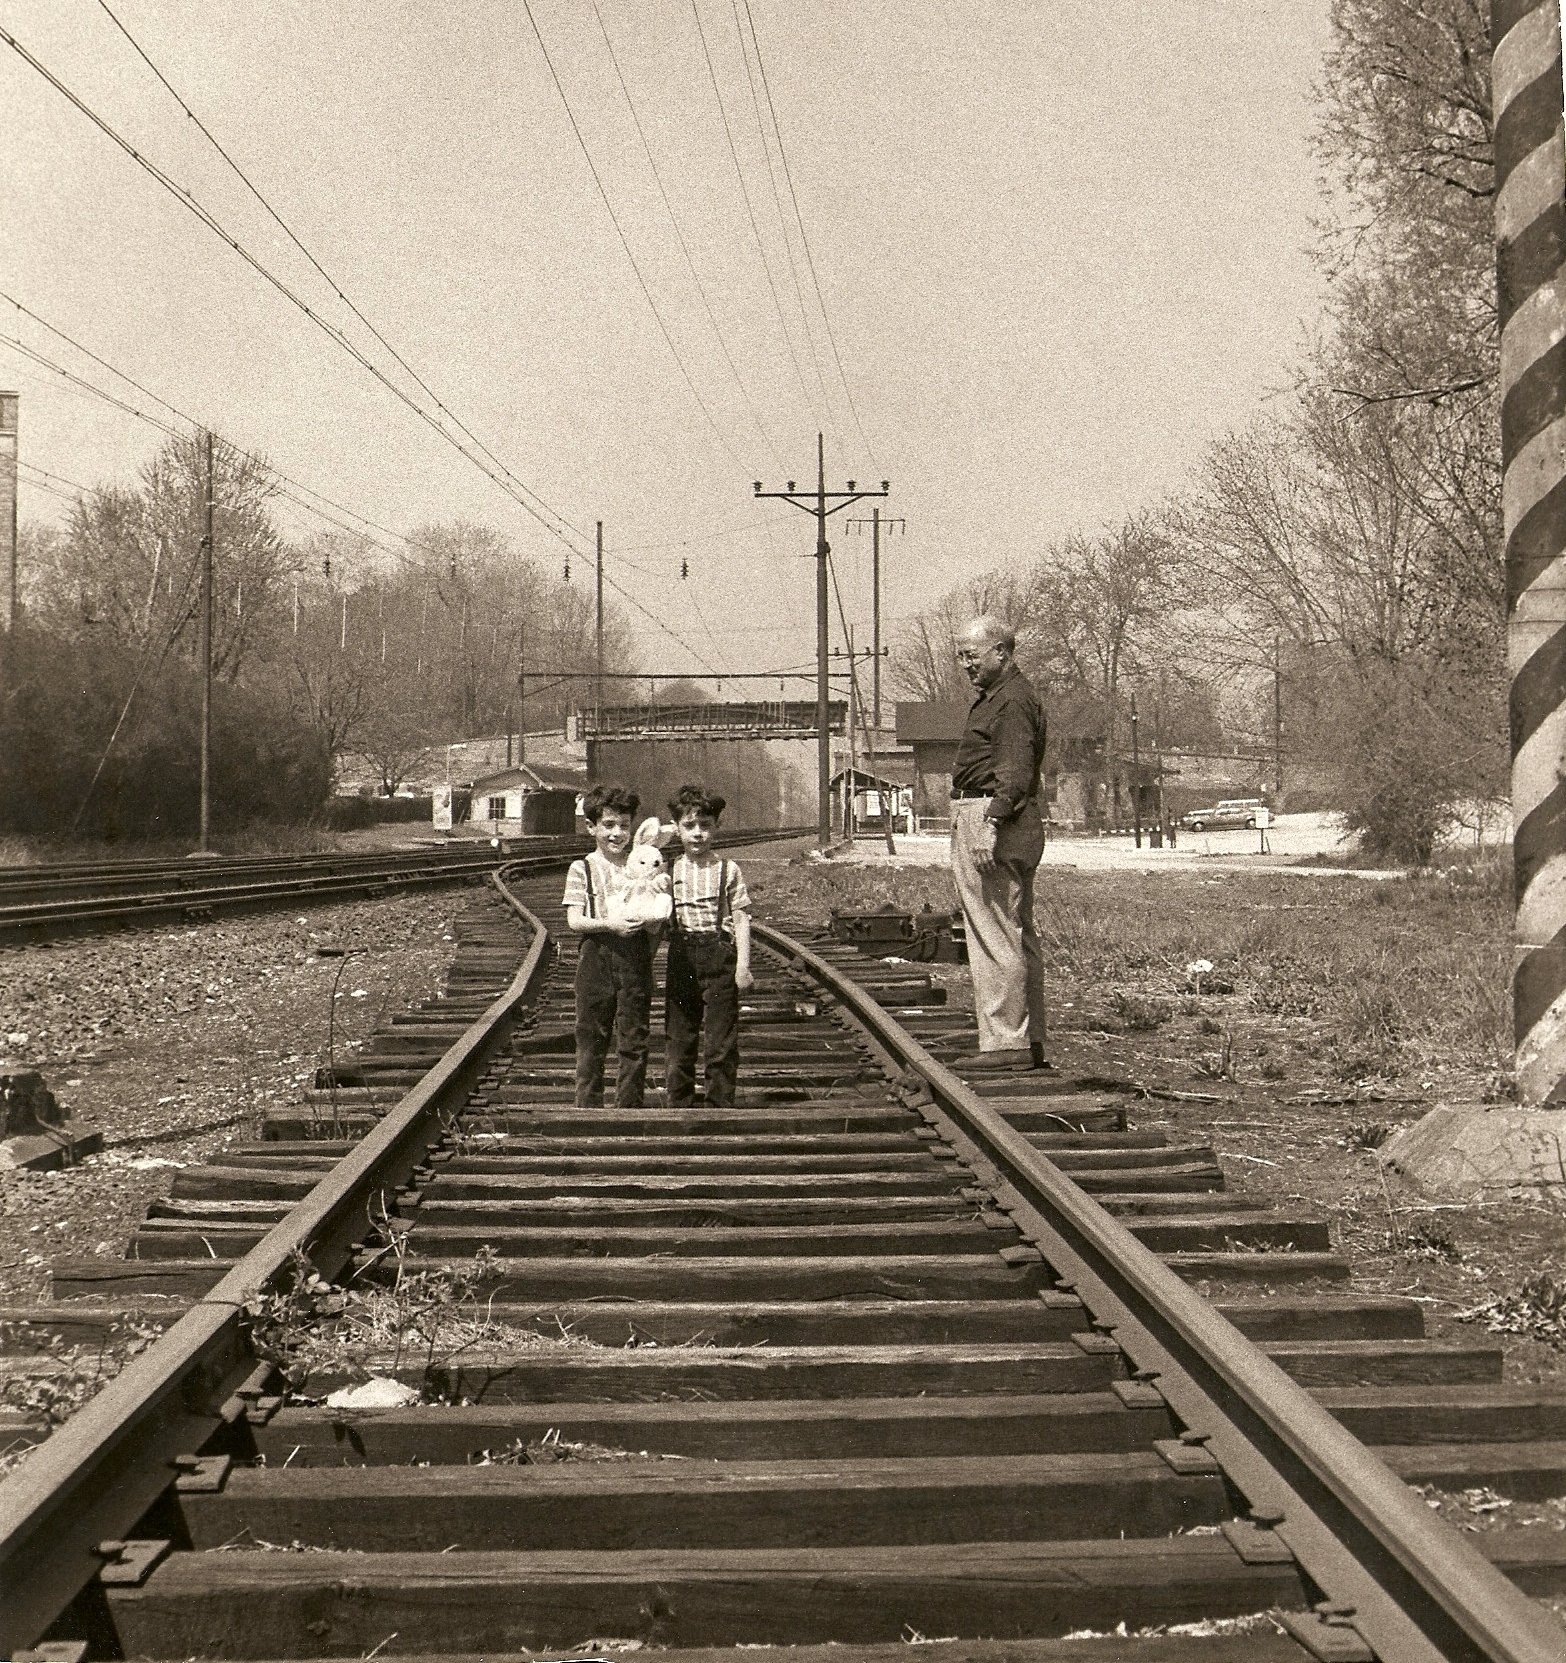  Bill and Frank as kids with their grandfather Joseph Tripician along the tracks at Villanova Station, where their uncle was PRR Station Master 